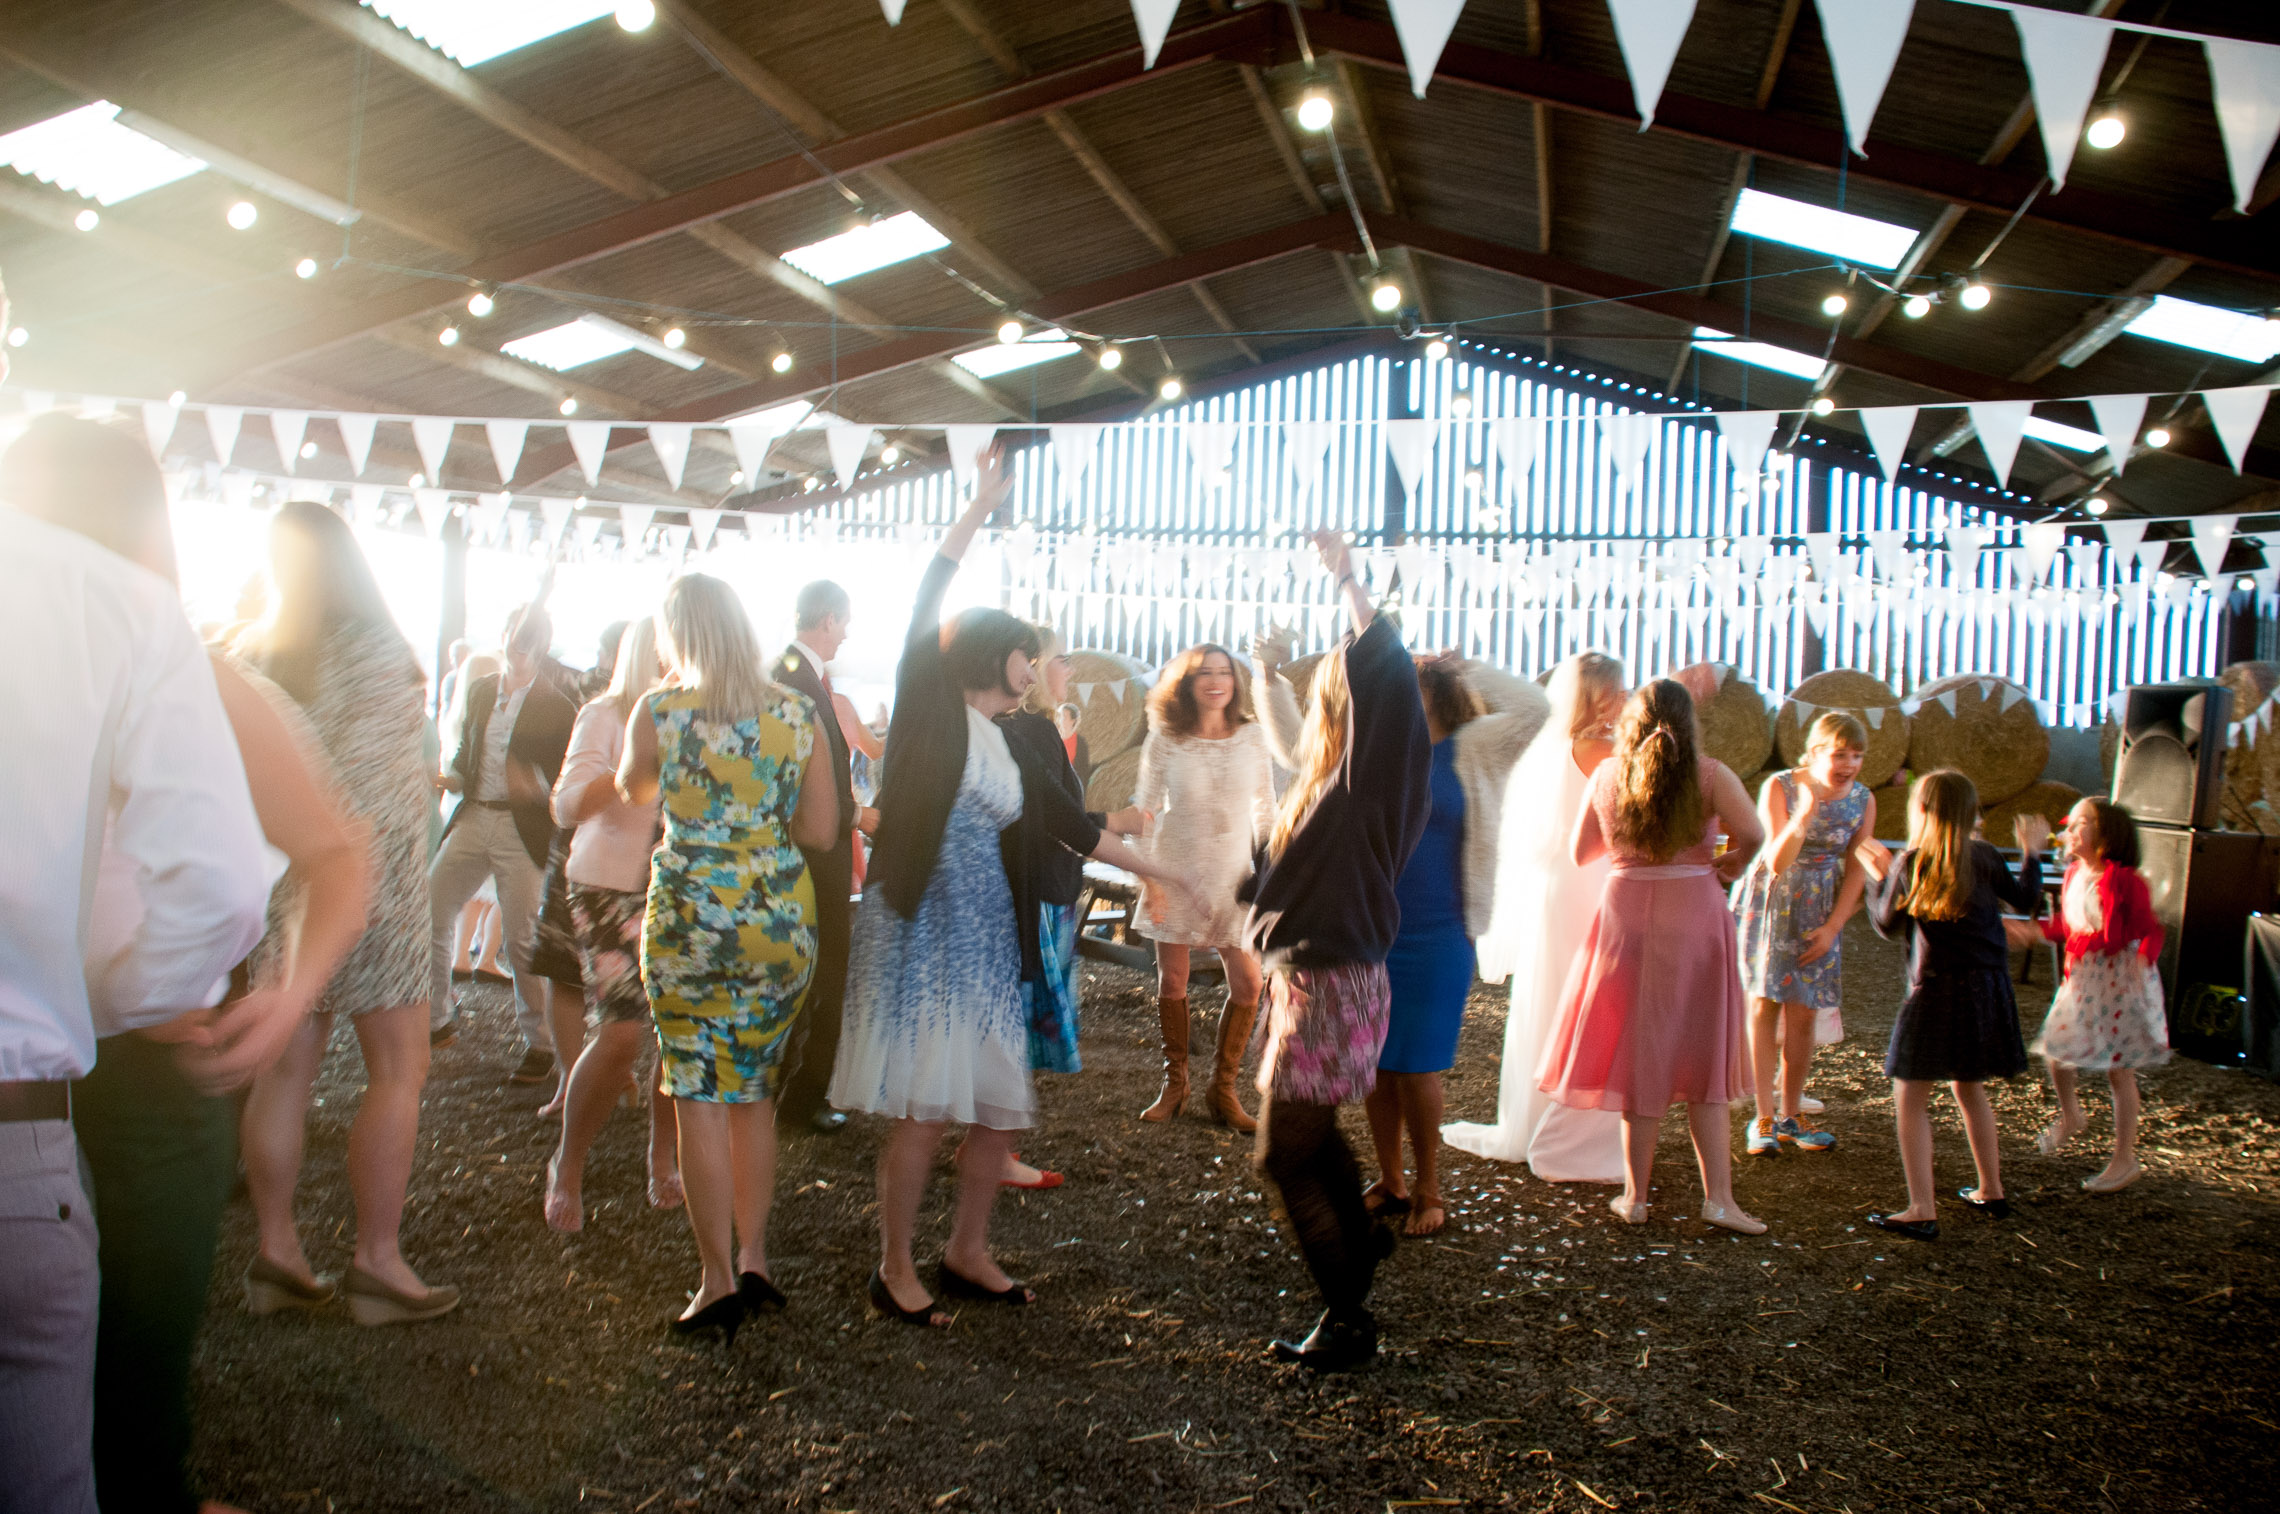 Party time in the barn